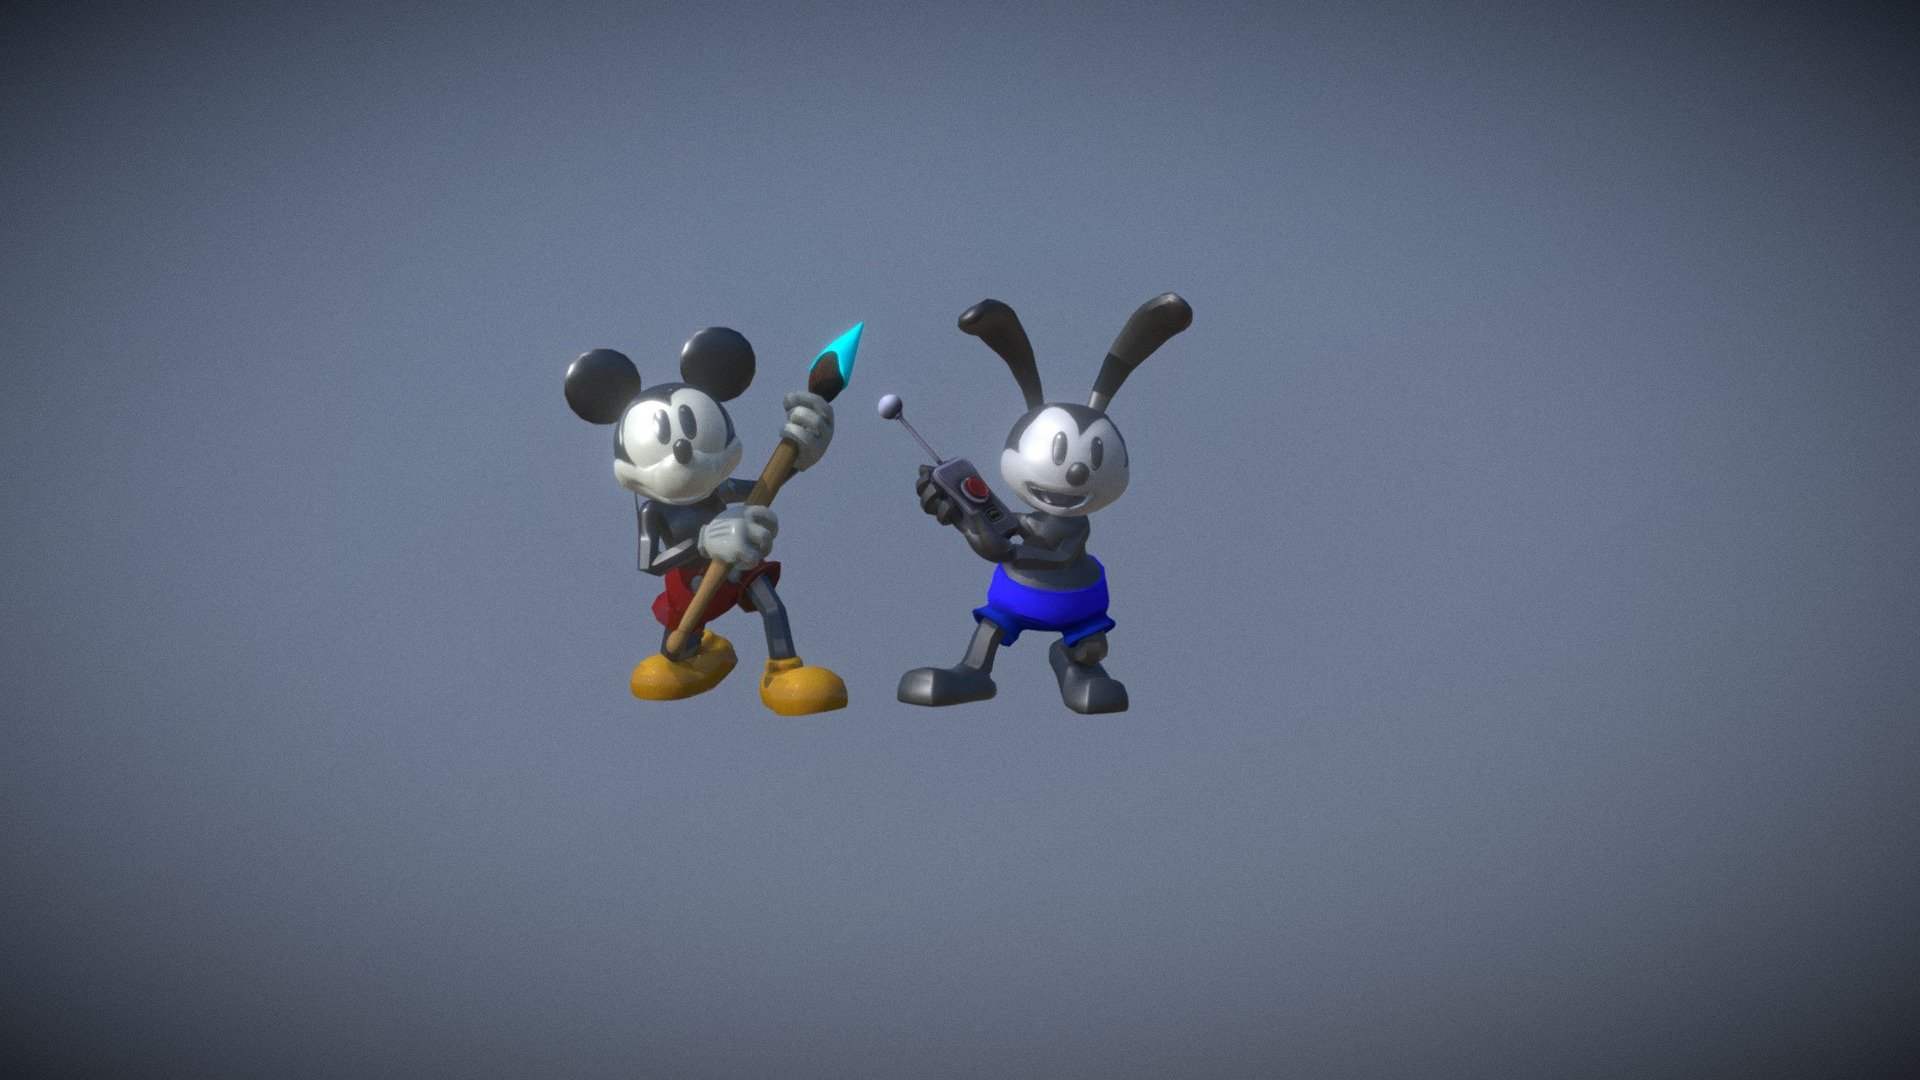 Usually, I use this model for Source Filmmaker, and decided to put it for a preview in this website.
Download the Source Filmmaker version here:
https://steamcommunity.com/sharedfiles/filedetails/?id=1666538462&amp;searchtext=Mickey
And My edited Oswald as well
https://steamcommunity.com/sharedfiles/filedetails/?id=1500982390 - Epic Mickey models test - 3D model by TheRedToony (@TheRedToonyboi) 3d model